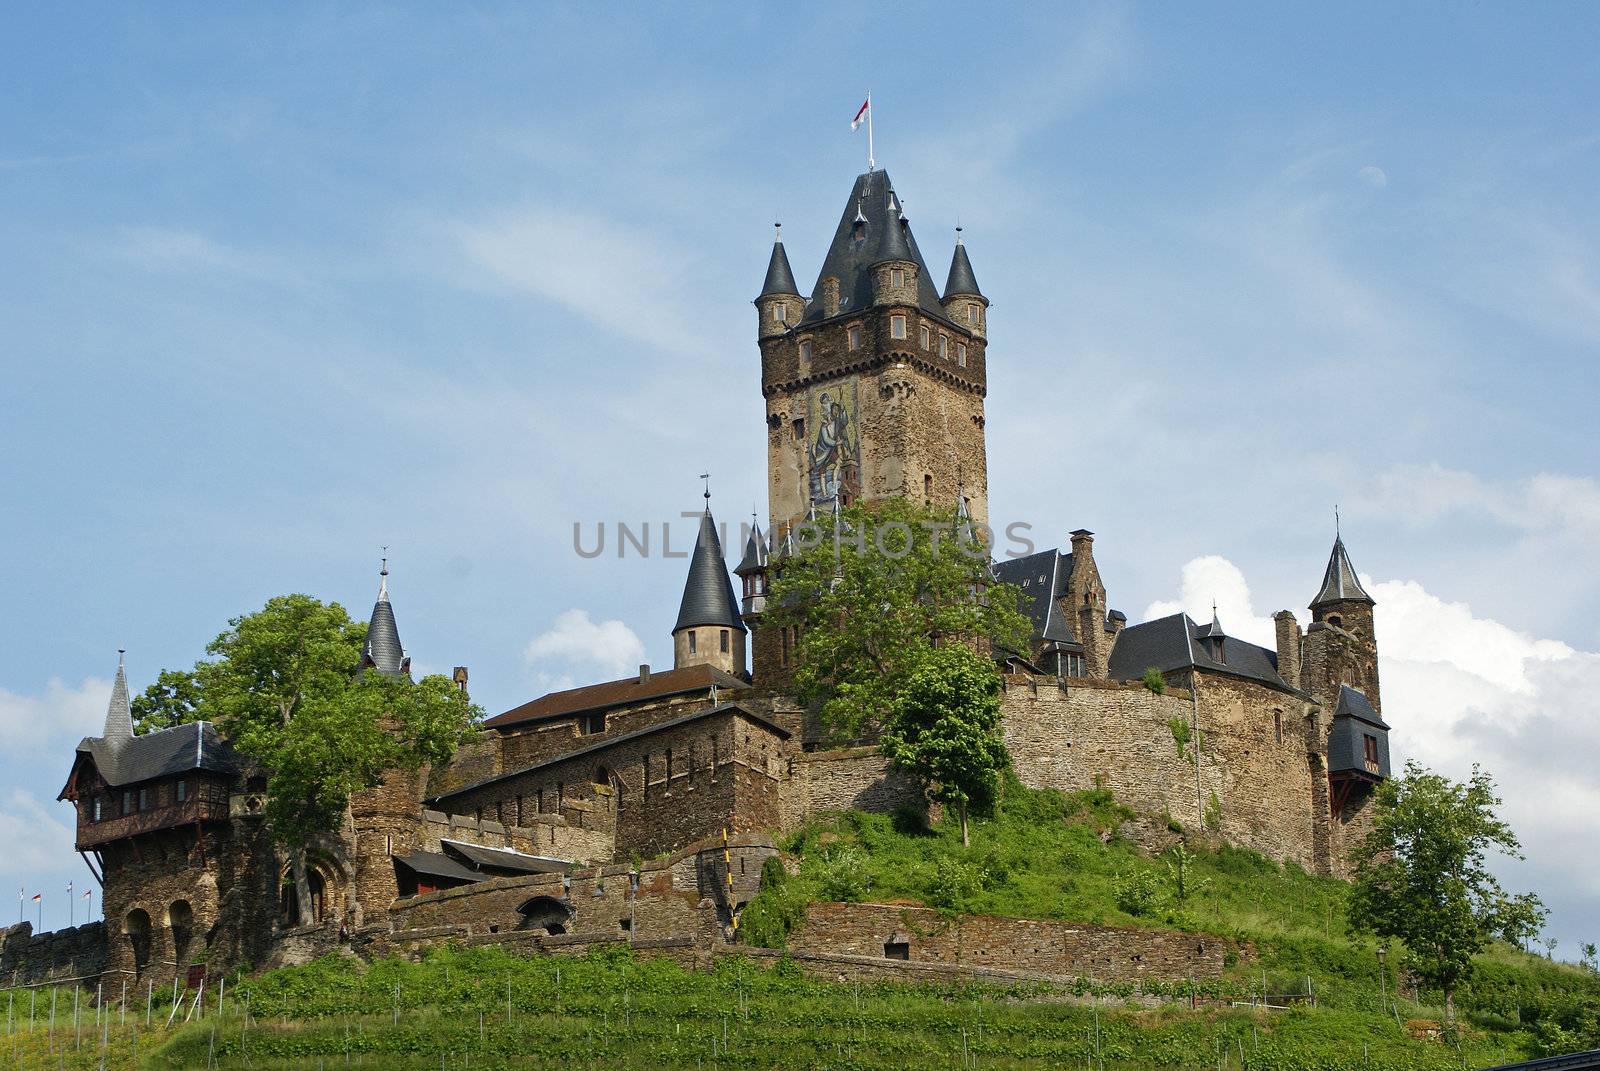 Castle Cochem, the beautiful old castle is one of the famous attractions along the Moselle river, Germany, Europe